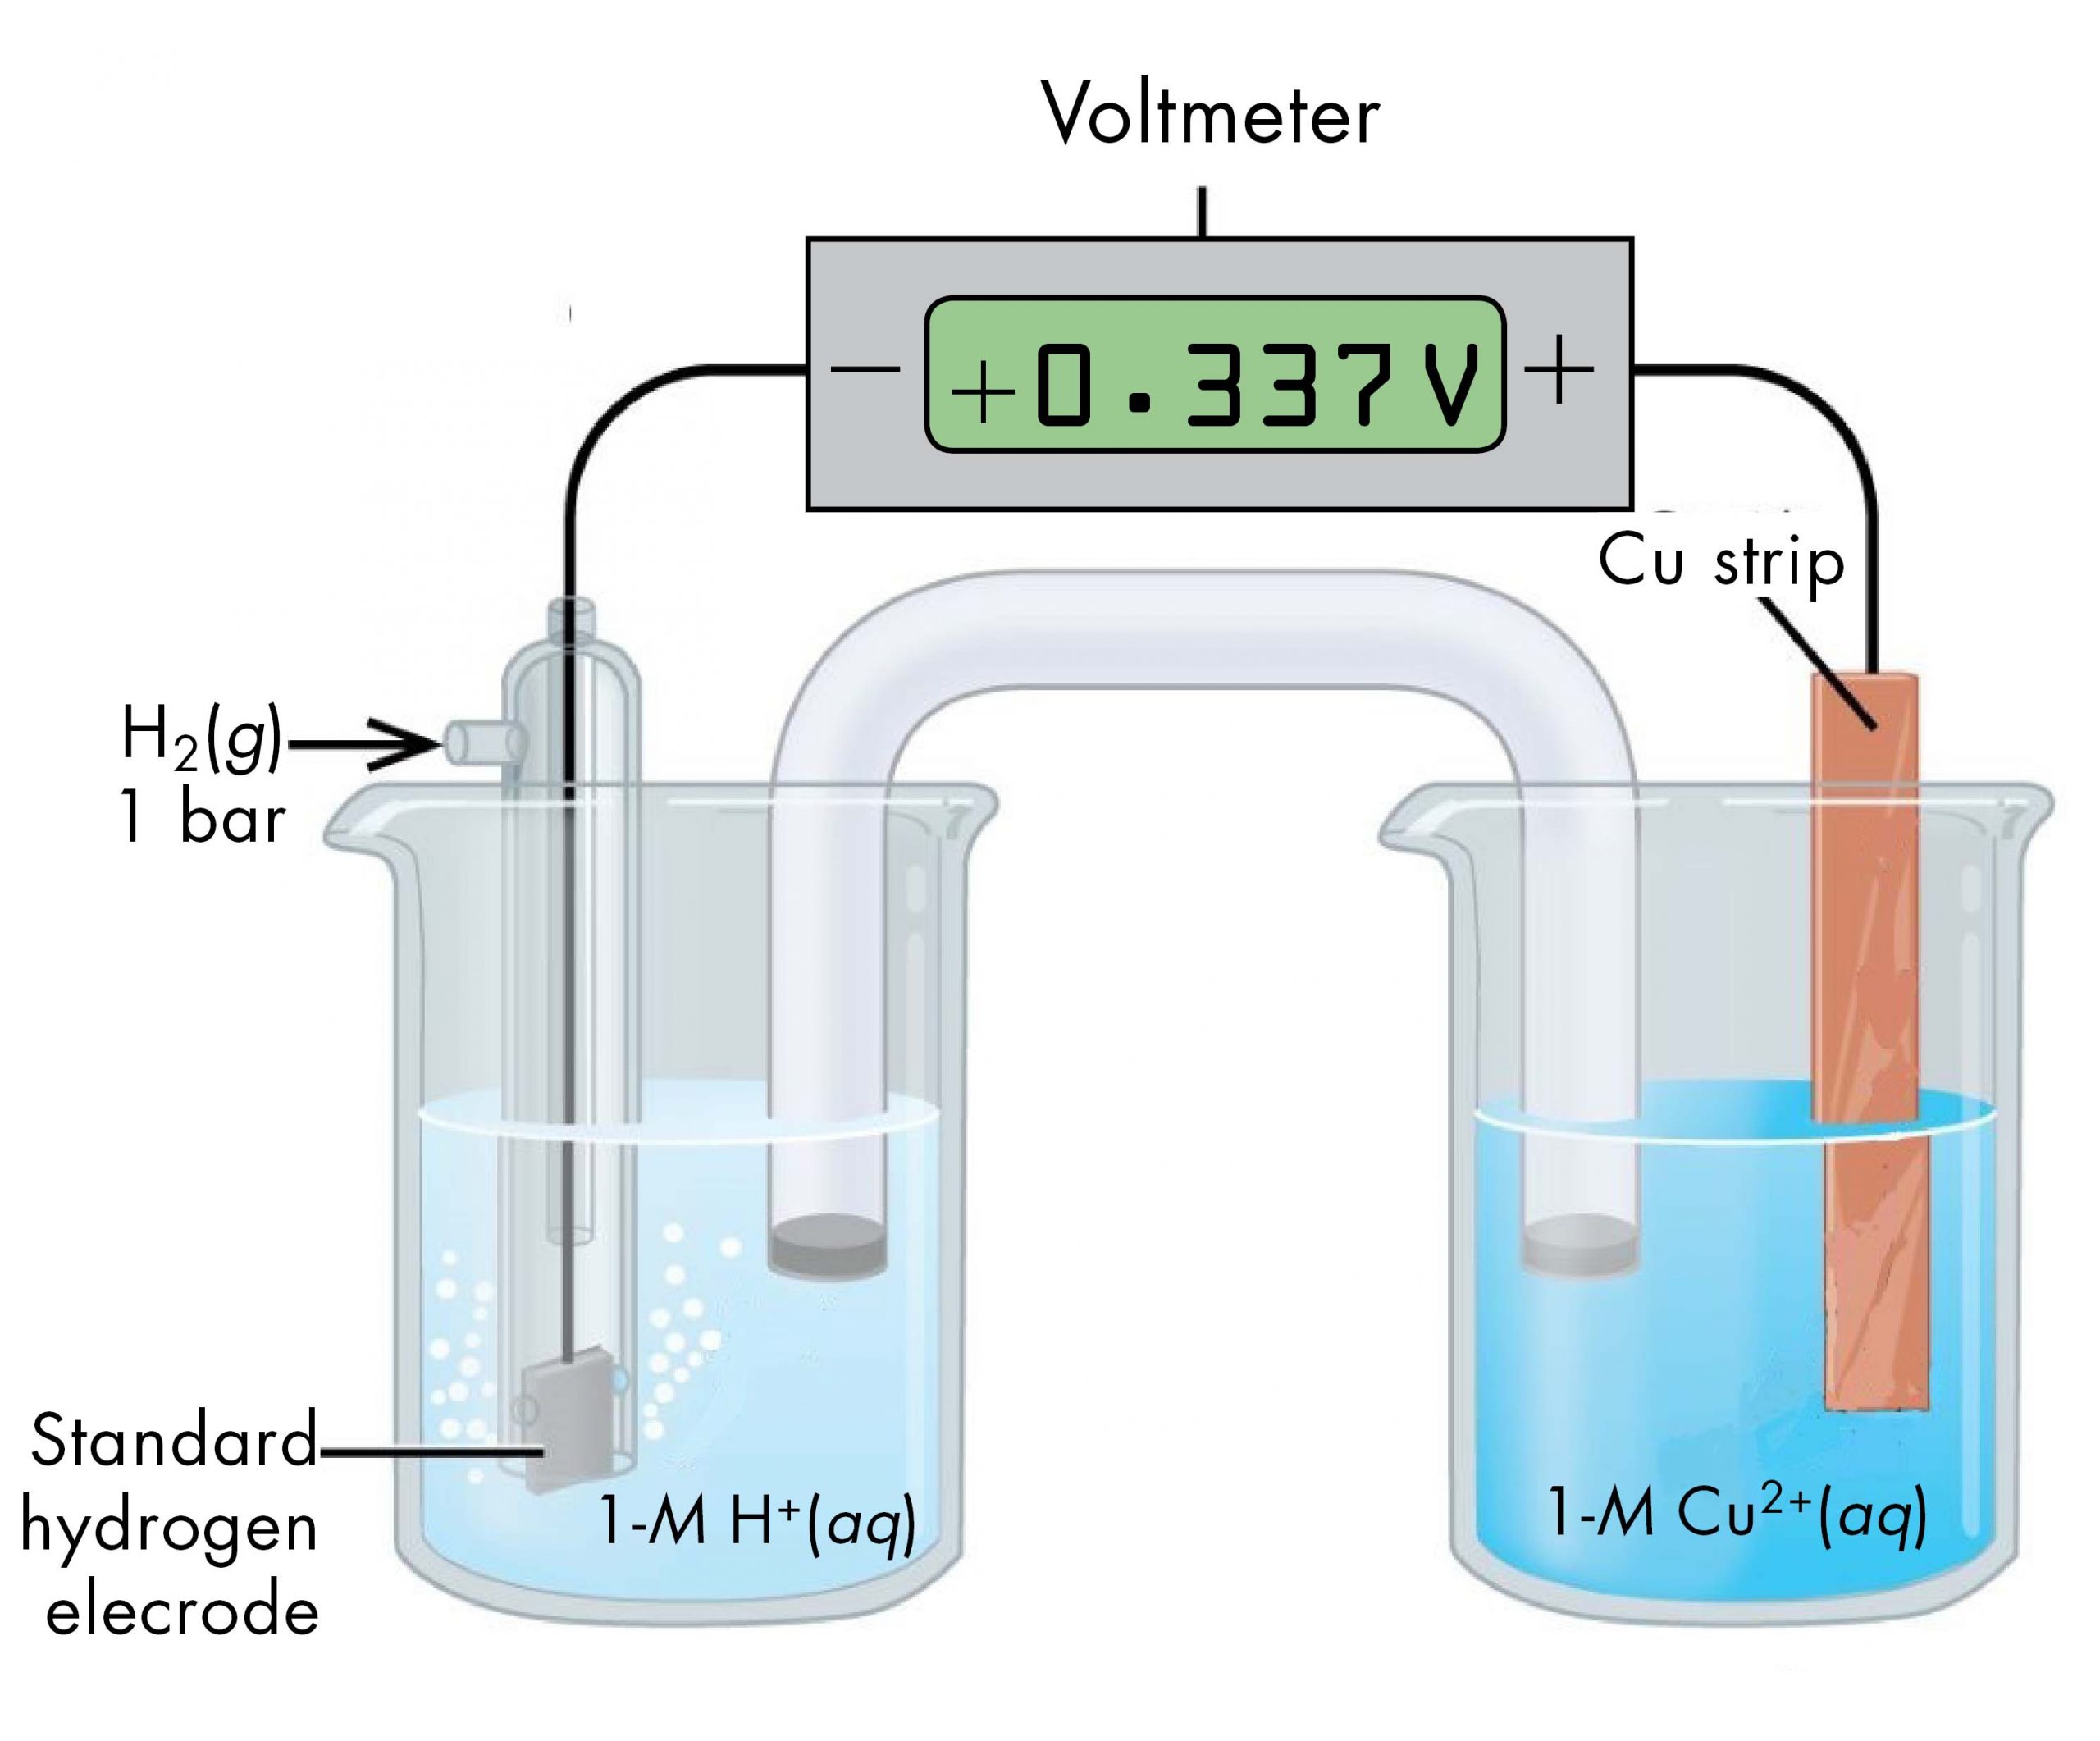 This figure contains a diagram of an electrochemical cell. Two beakers are shown. Each is just over half full. The beaker on the left contains a clear, colorless solution and is labeled below as “1 M H superscript plus.” The beaker on the right contains a blue solution and is labeled below as “1 M C u superscript 2 plus.” A glass tube in the shape of an inverted U, a salt bridge, connects the two beakers at the center of the diagram. The tube contents are colorless. The ends of the tube are beneath the surface of the solutions in the beakers and a small grey plug is present at each end of the tube. The beaker on the left has a glass tube partially submersed in the liquid. Bubbles are rising from a grey square, labeled “Standard hydrogen electrode”, at the bottom of the tube. A black wire extends from the grey square up the interior of the tube through a small port at the top to a rectangle with a digital readout of “positive 0.337 V” which is labeled “Voltmeter.” The wire connects to the negative terminal of the voltmeter. A second small port extends out the top of the tube to the left. An arrow points from the left to the port opening. The base of this arrow is labeled “H subscript 2 ( g ) 1 bar.” The beaker on the right has an orange-brown strip that is labeled “C u strip” at the top. A wire extends from the top of this strip to the voltmeter, connecting to the positive terminal. The solution in the right beaker is labeled “1-M H superscript plus.”